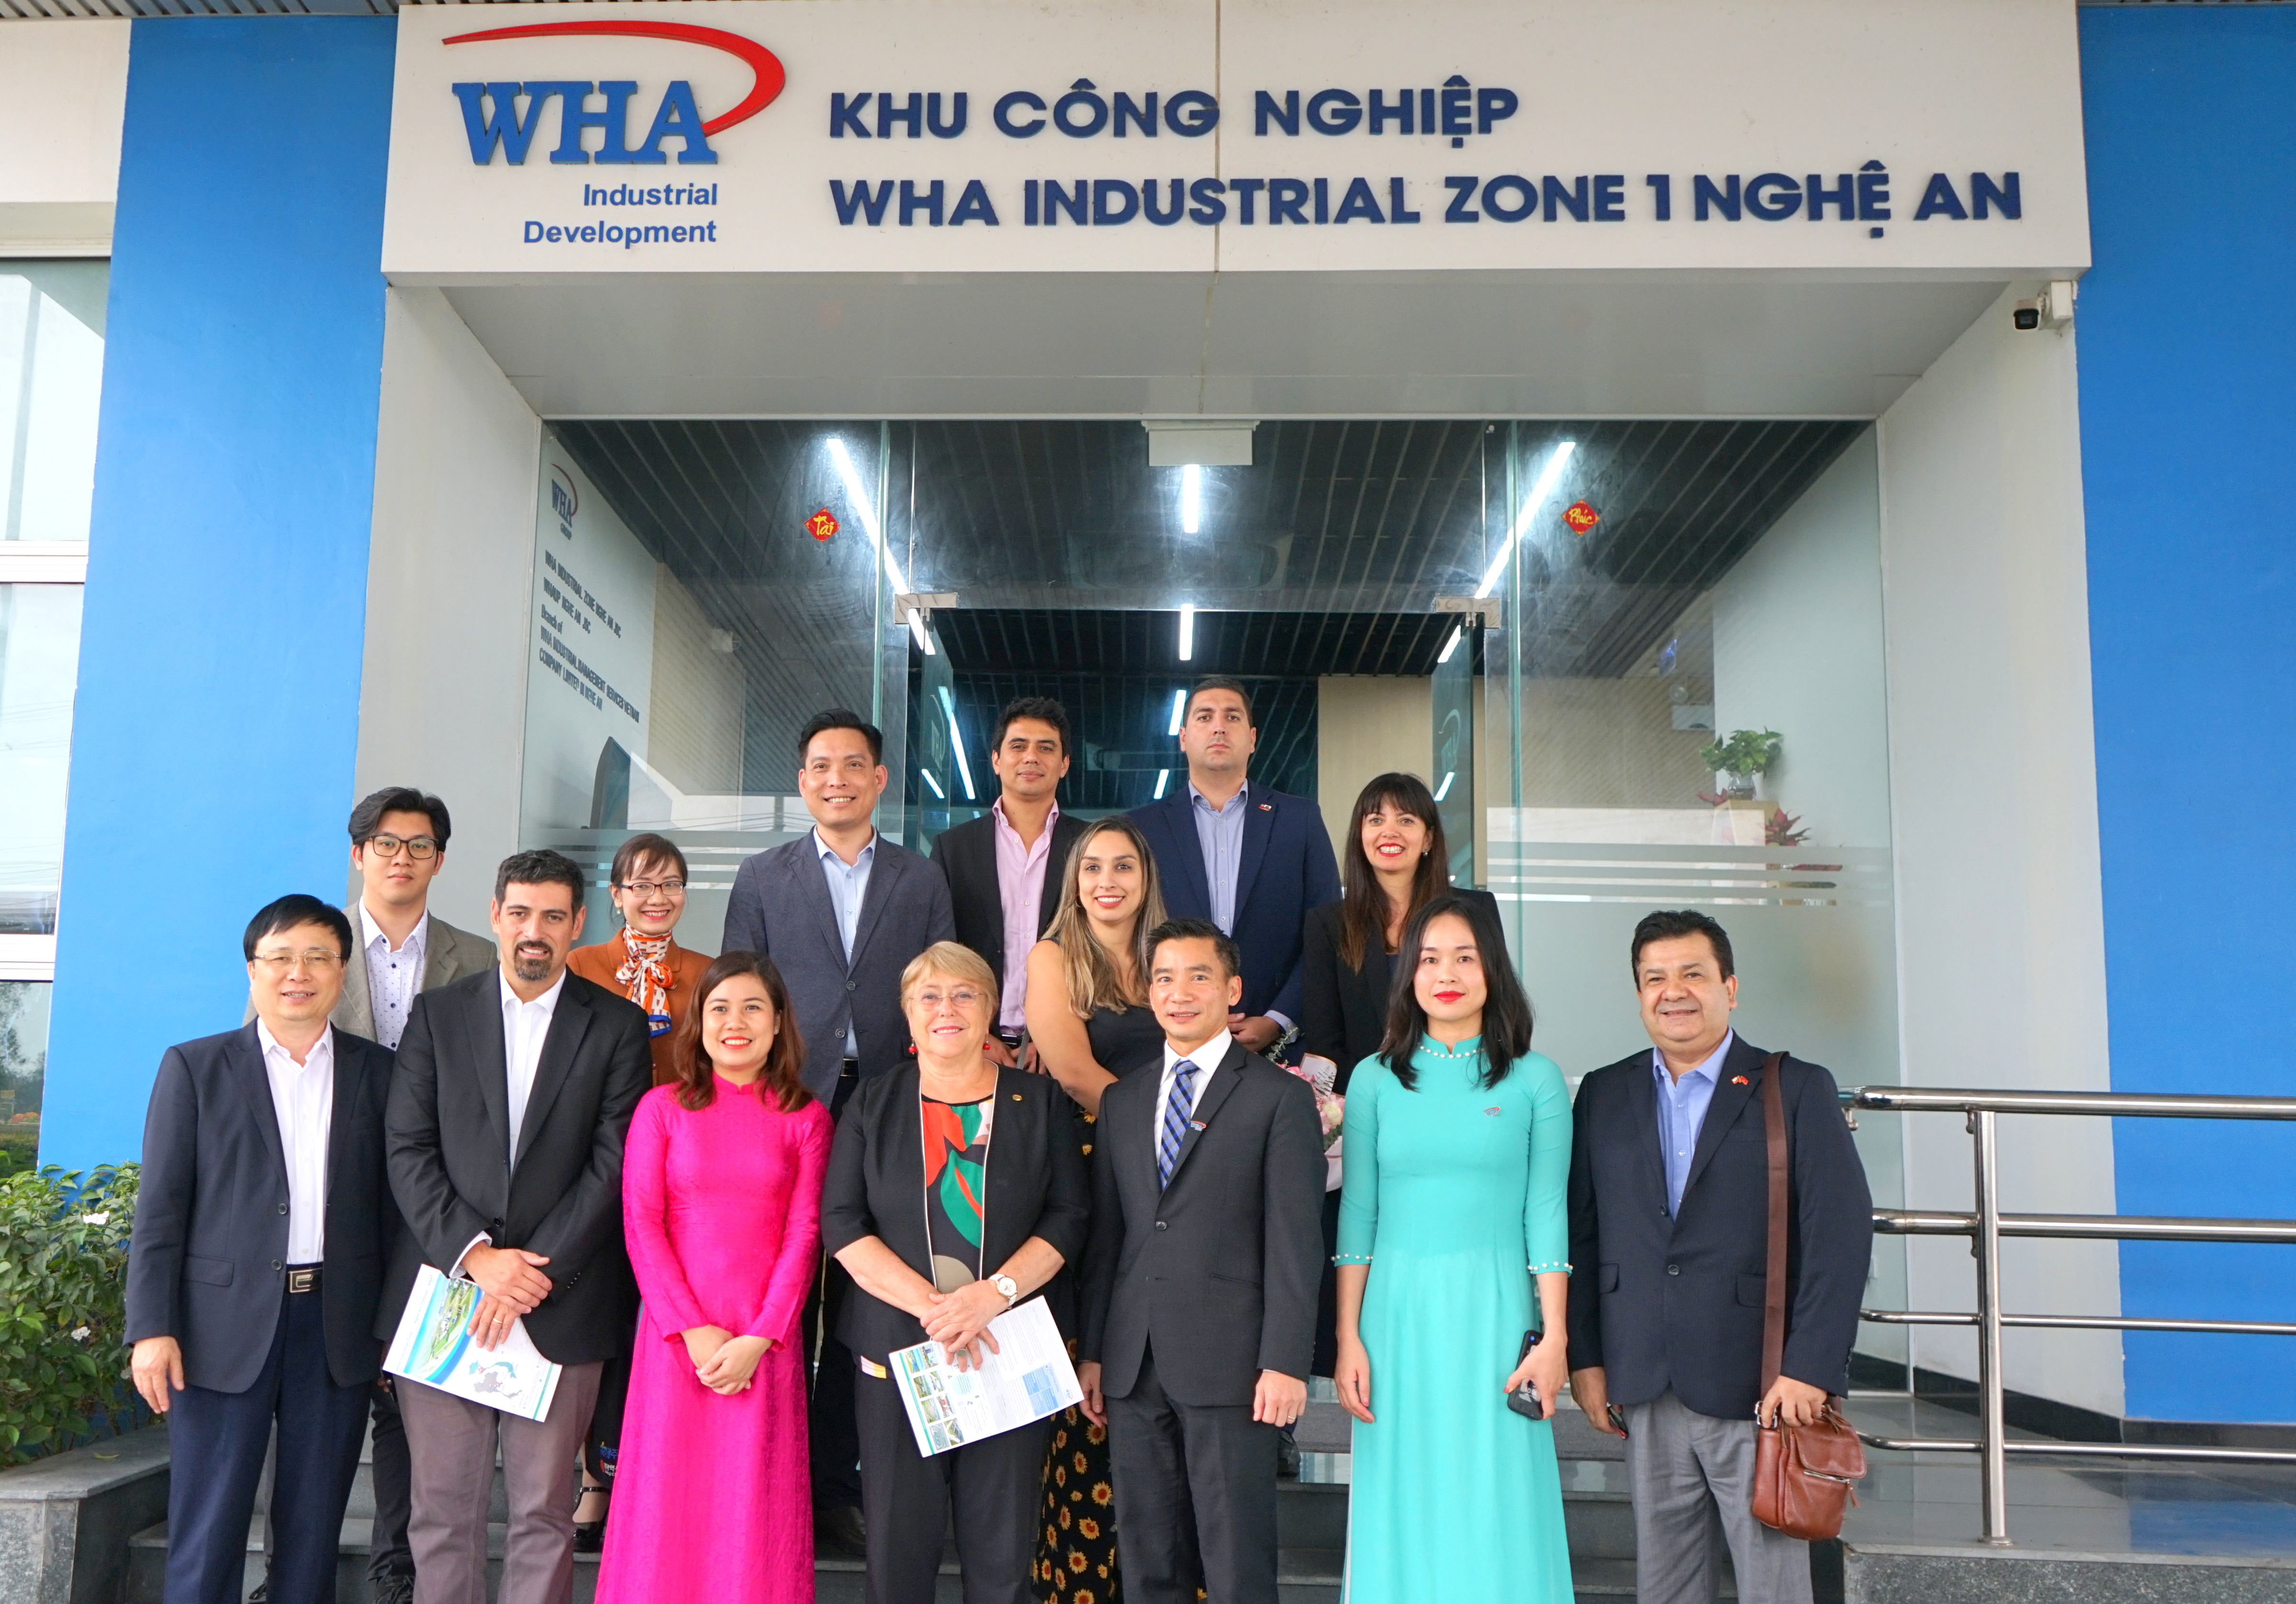 Former President of Chile leads Delegation to visit WHA Industrial Zone 1 - Nghe An